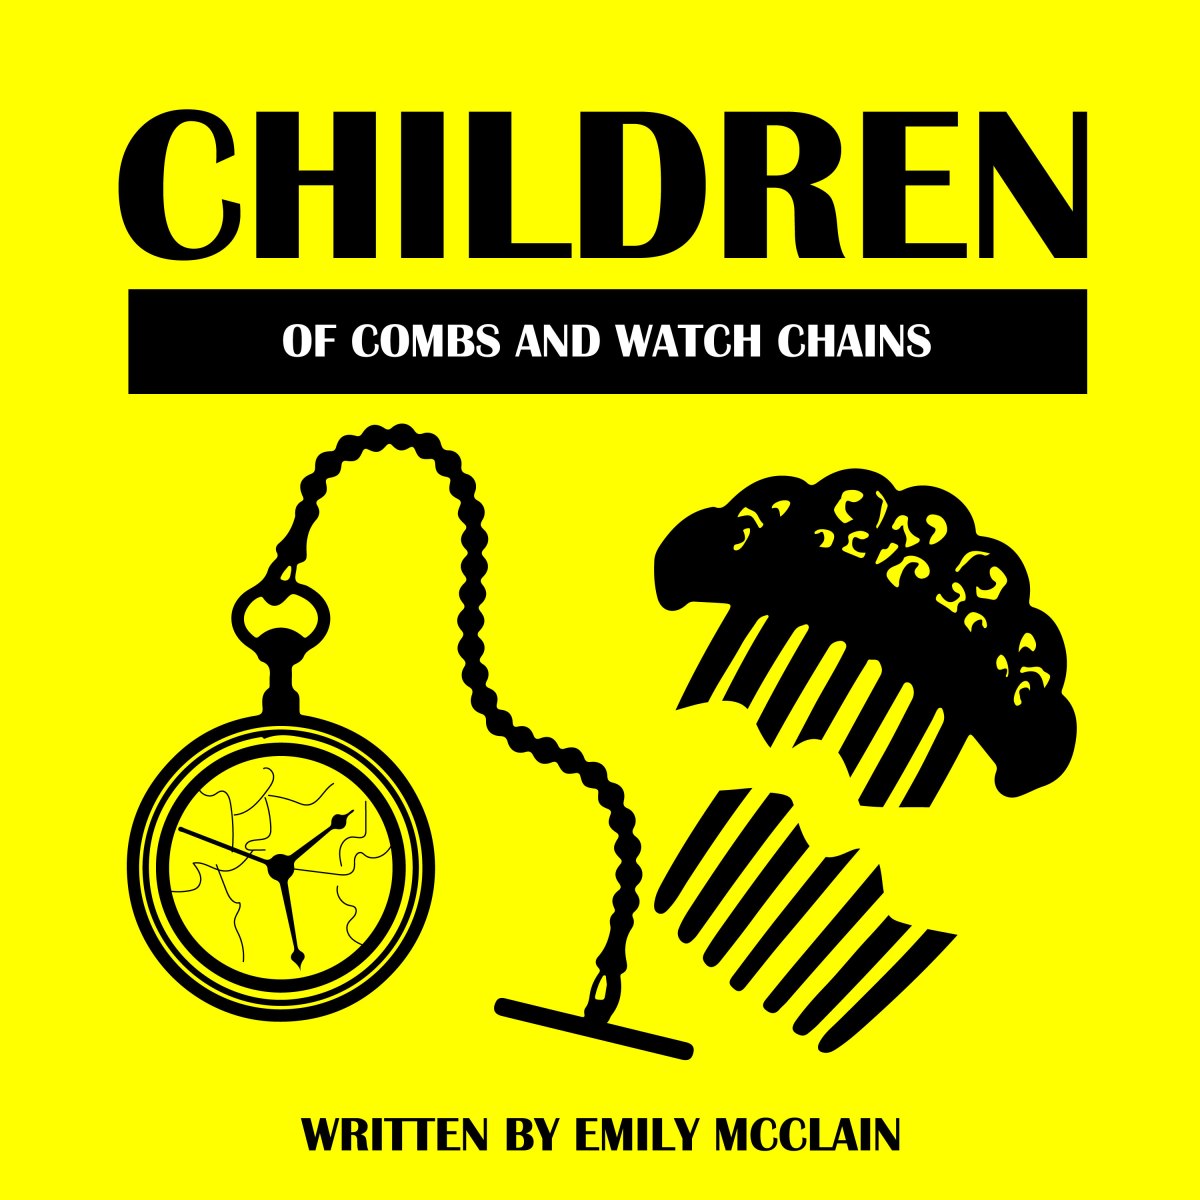 CHILDREN OF THE COMB AND WATCH CHAIN